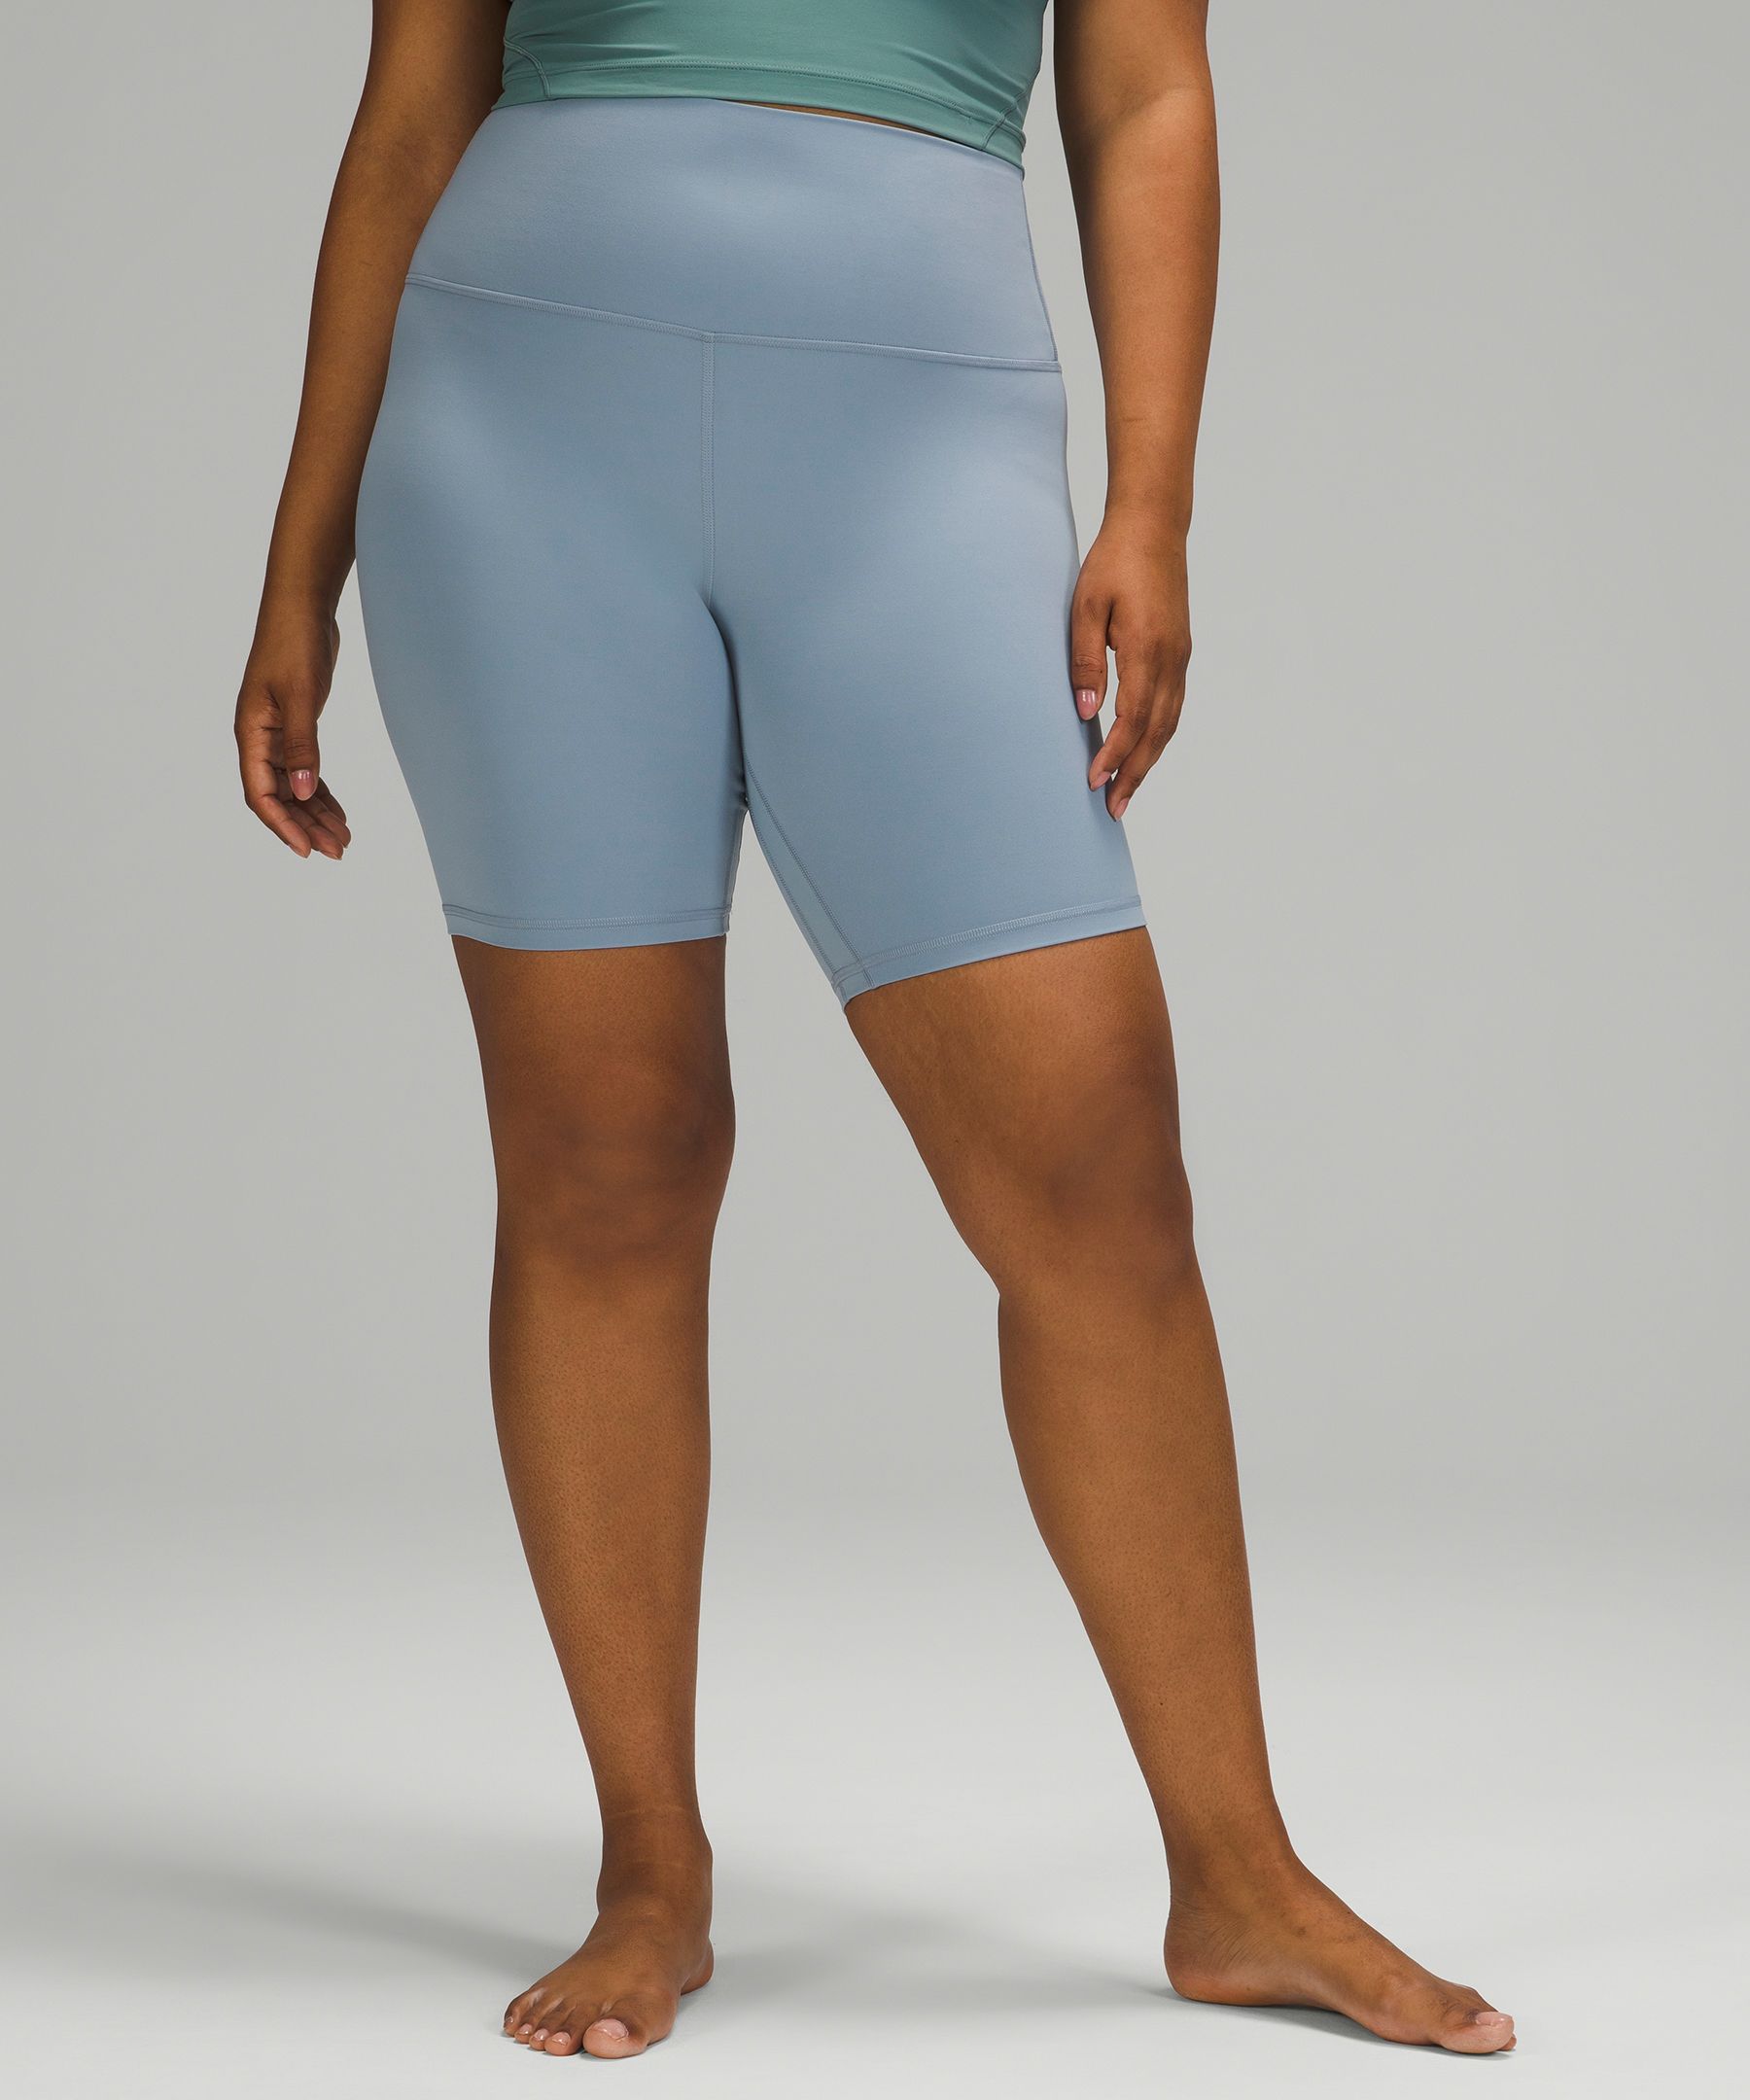 Lululemon Align™ High-rise Shorts 8" In Chambray